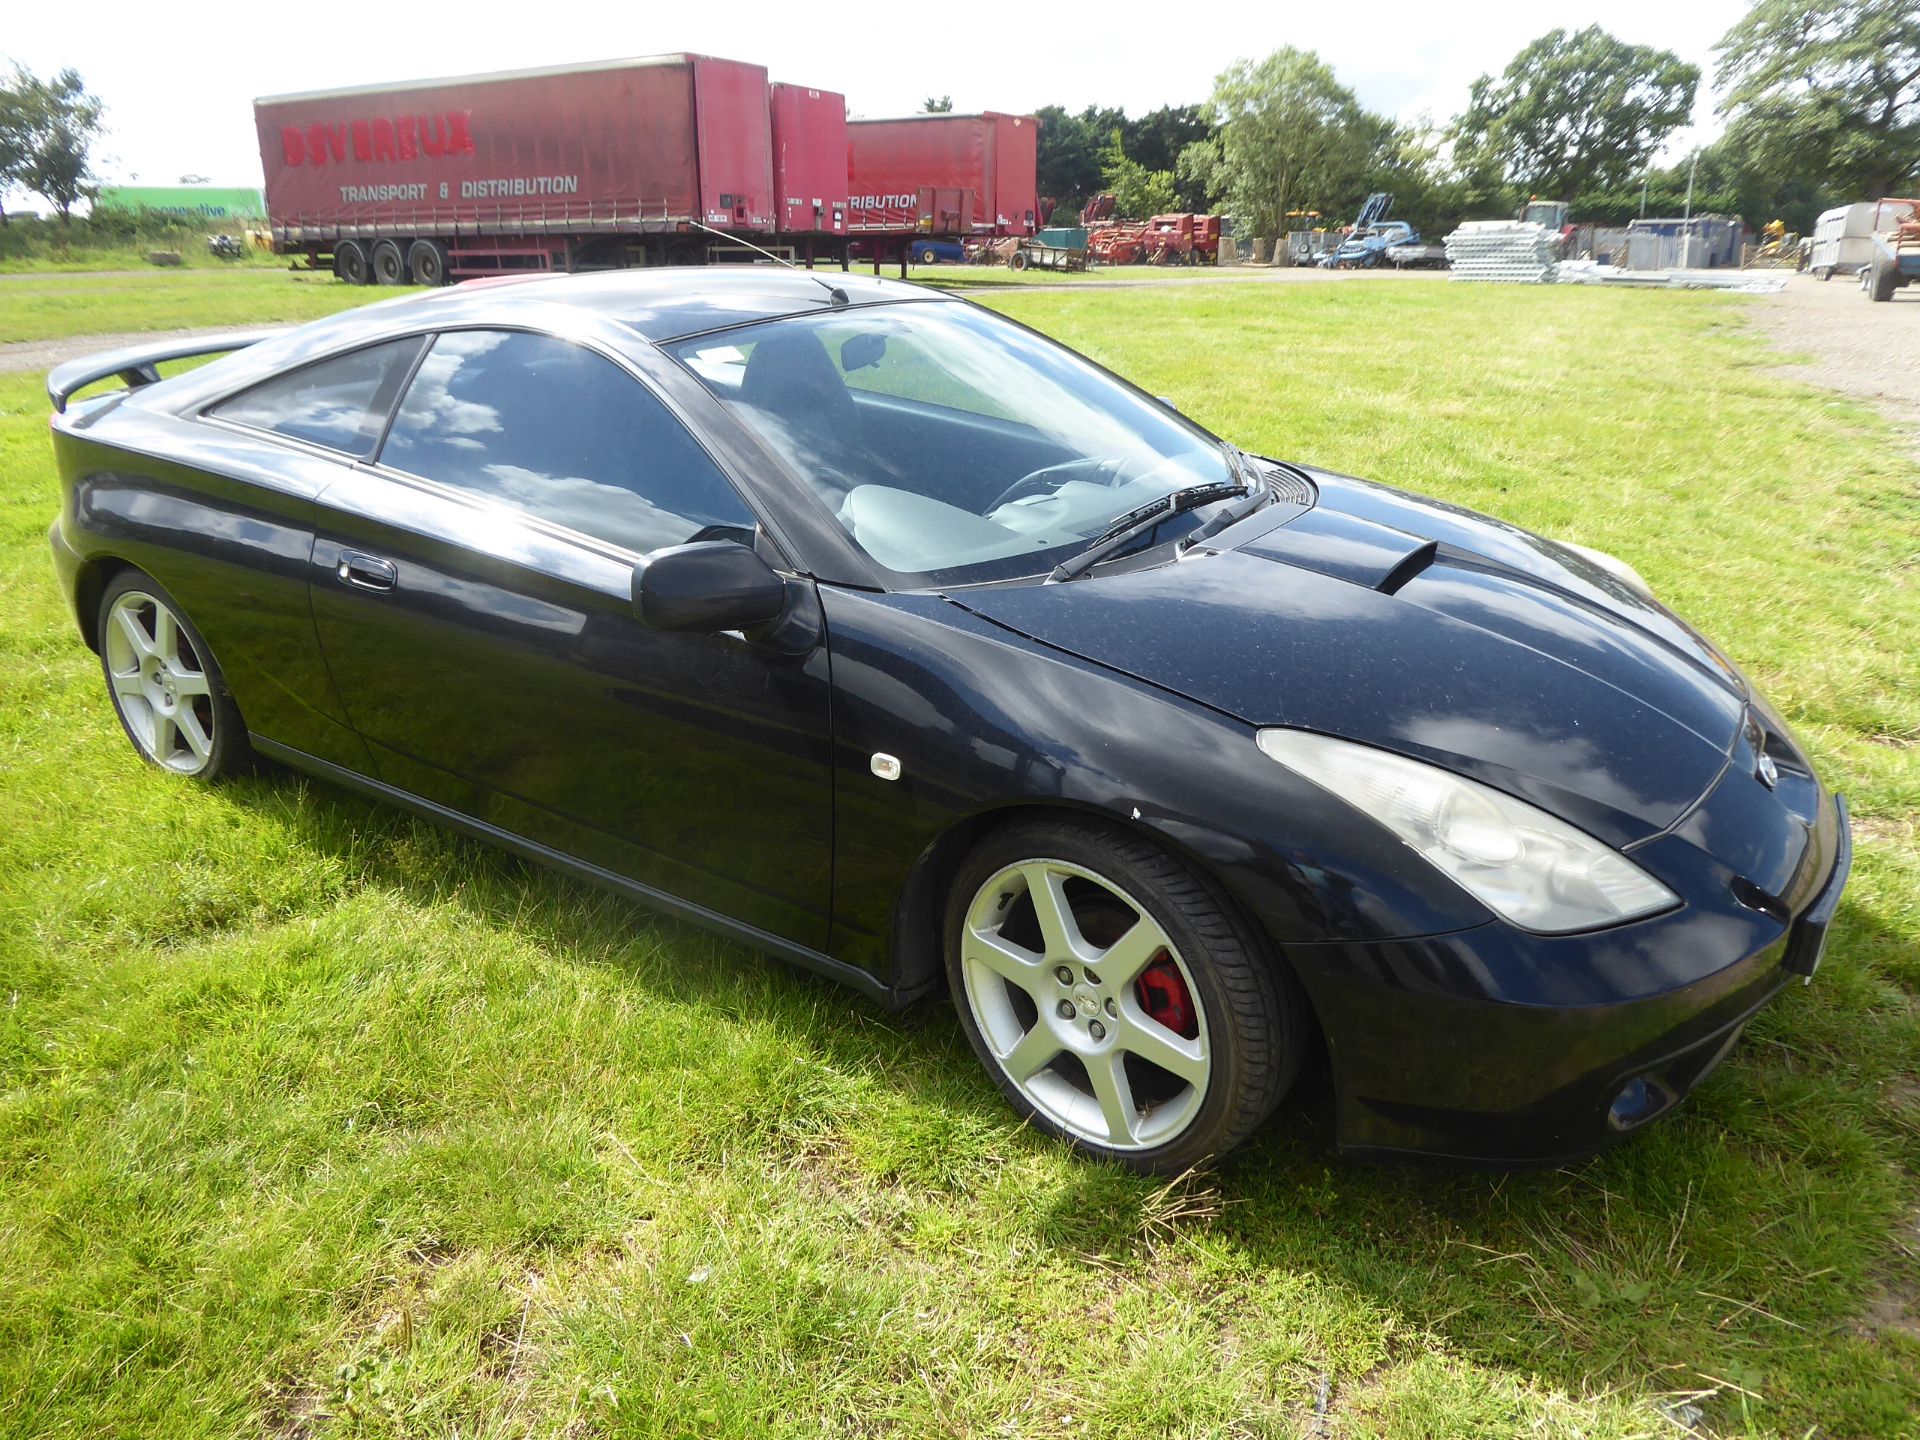 Toyota Celica VVTi coupe, 1794cc, unused for 3 years, runs and drives, no rear silencer, W612 NFT